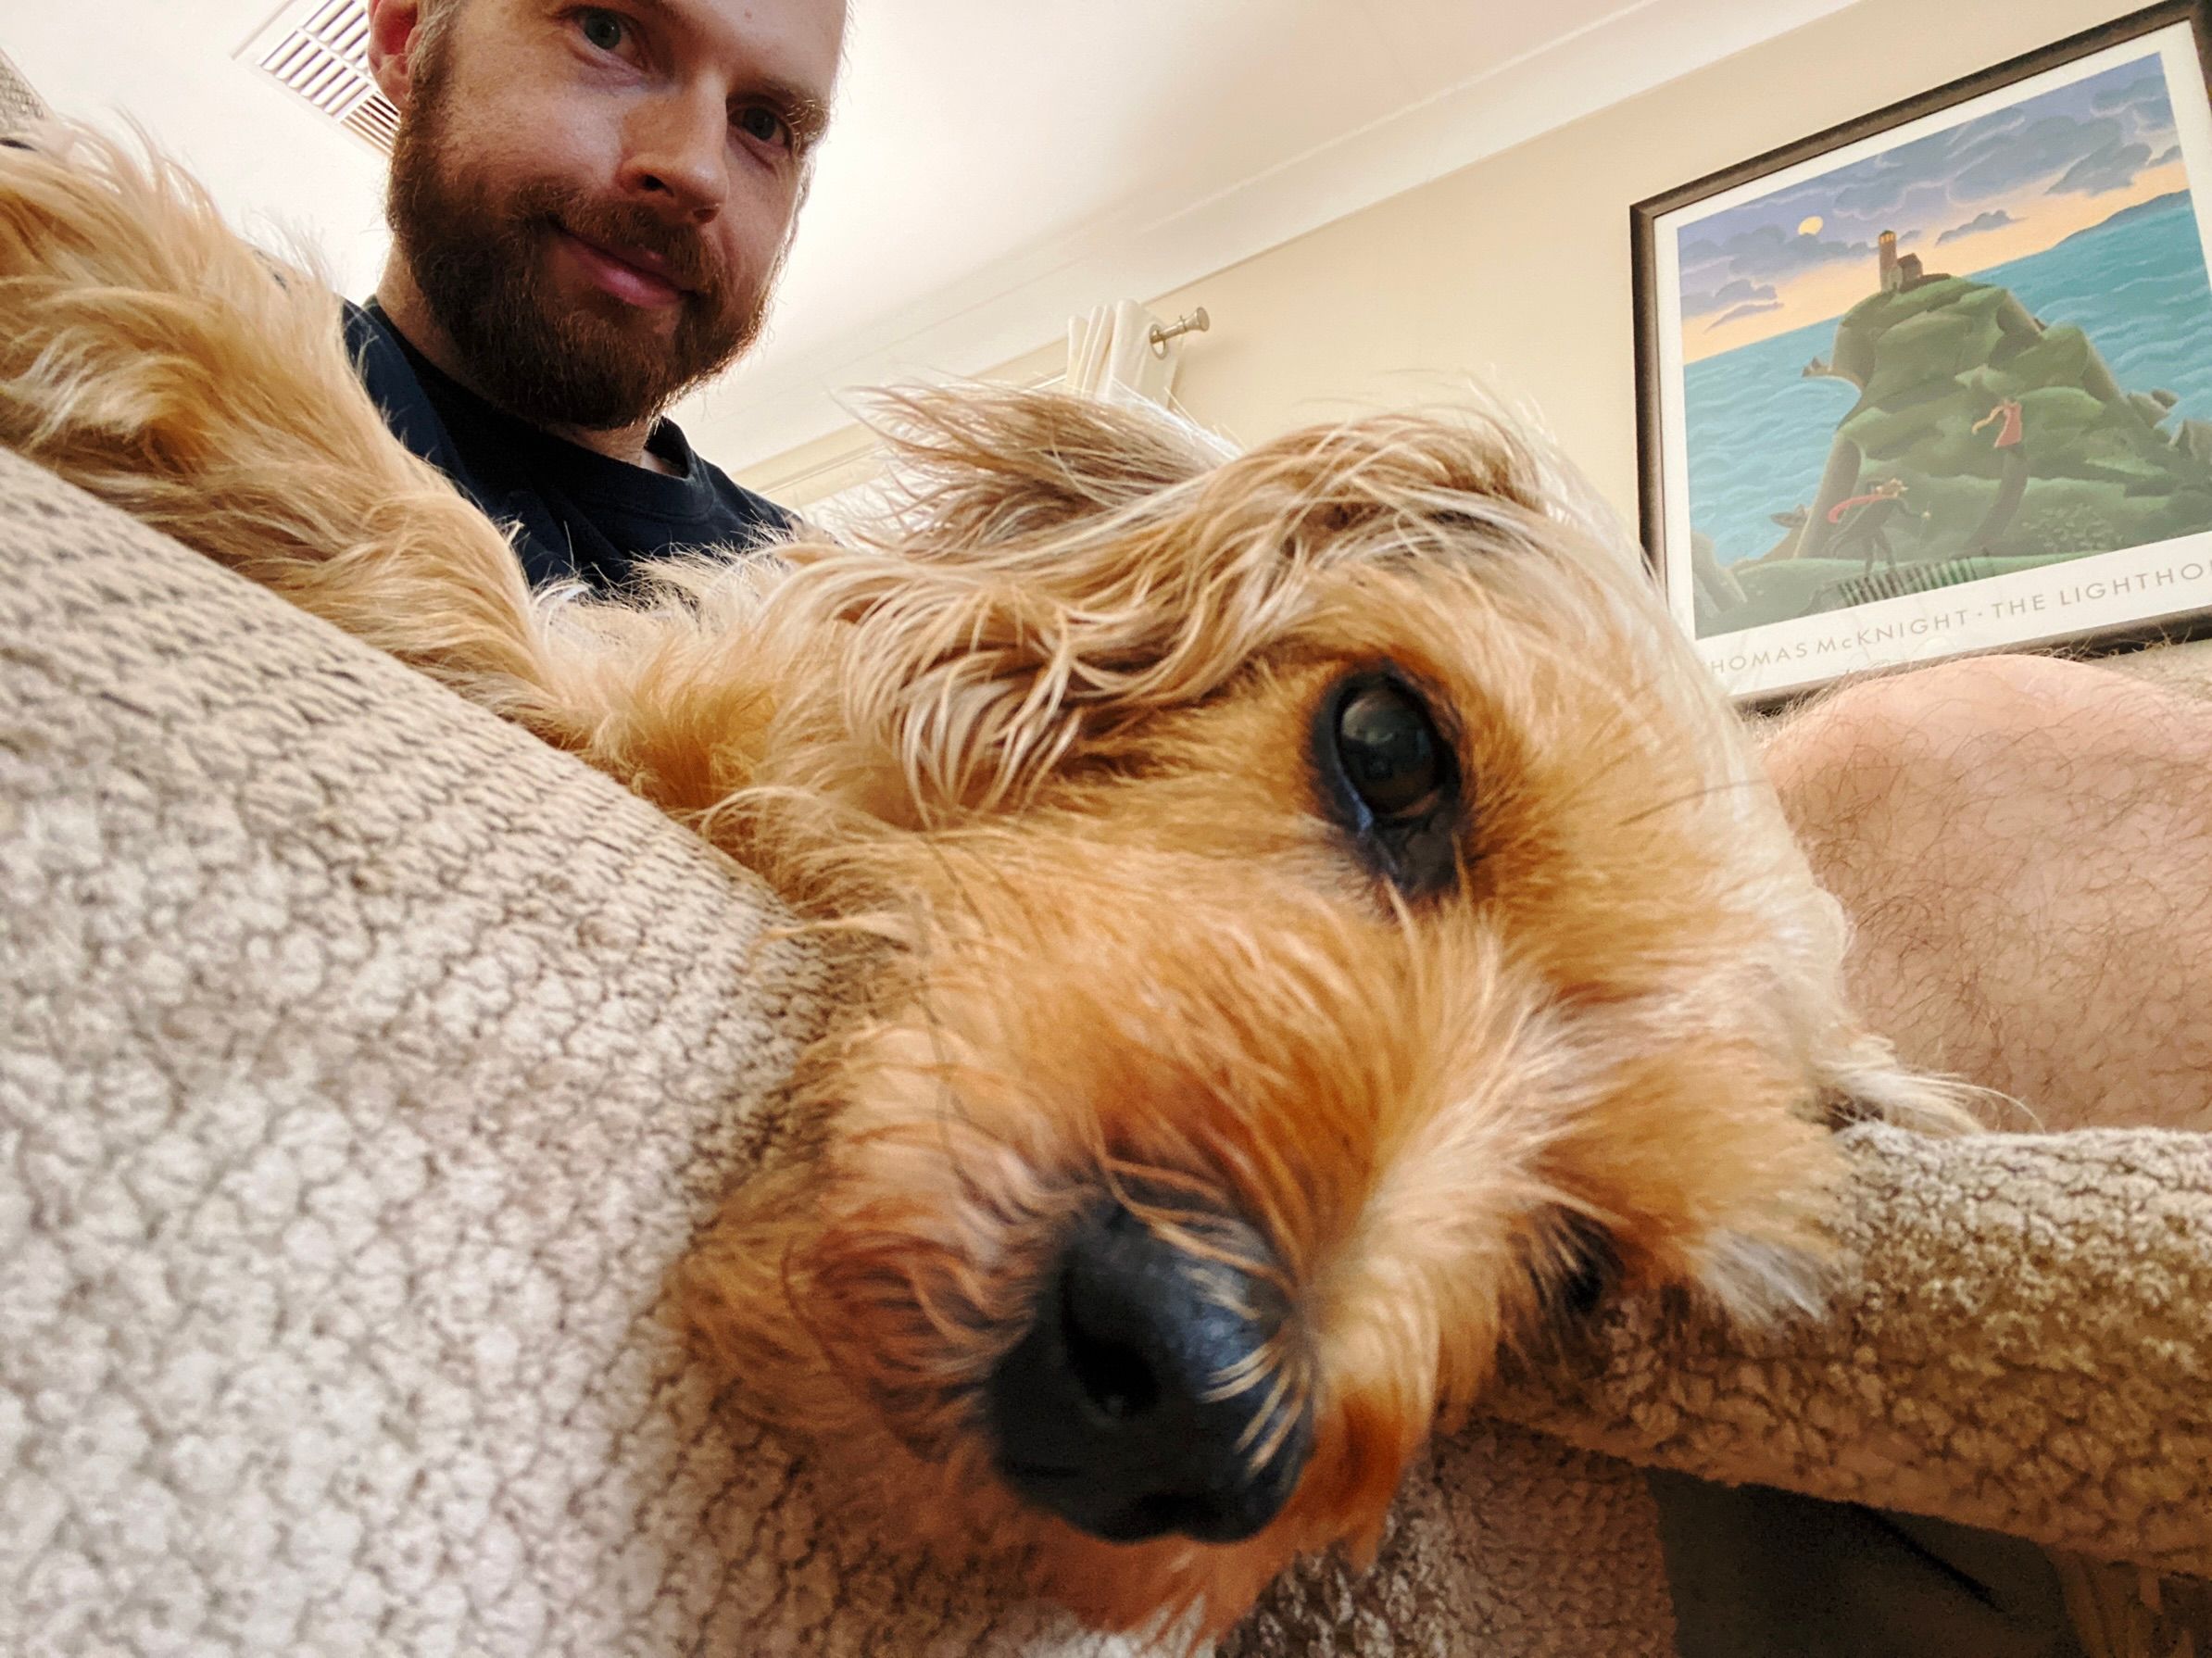 A photo of the same scruffy blonde dog but this is taken with the front-facing camera with me holding the phone down in front of where his head is off the edge of the lounge so his head fills the photo. He looks very sleepy. I'm in the background smiling at the camera, a white man with a reddish beard.